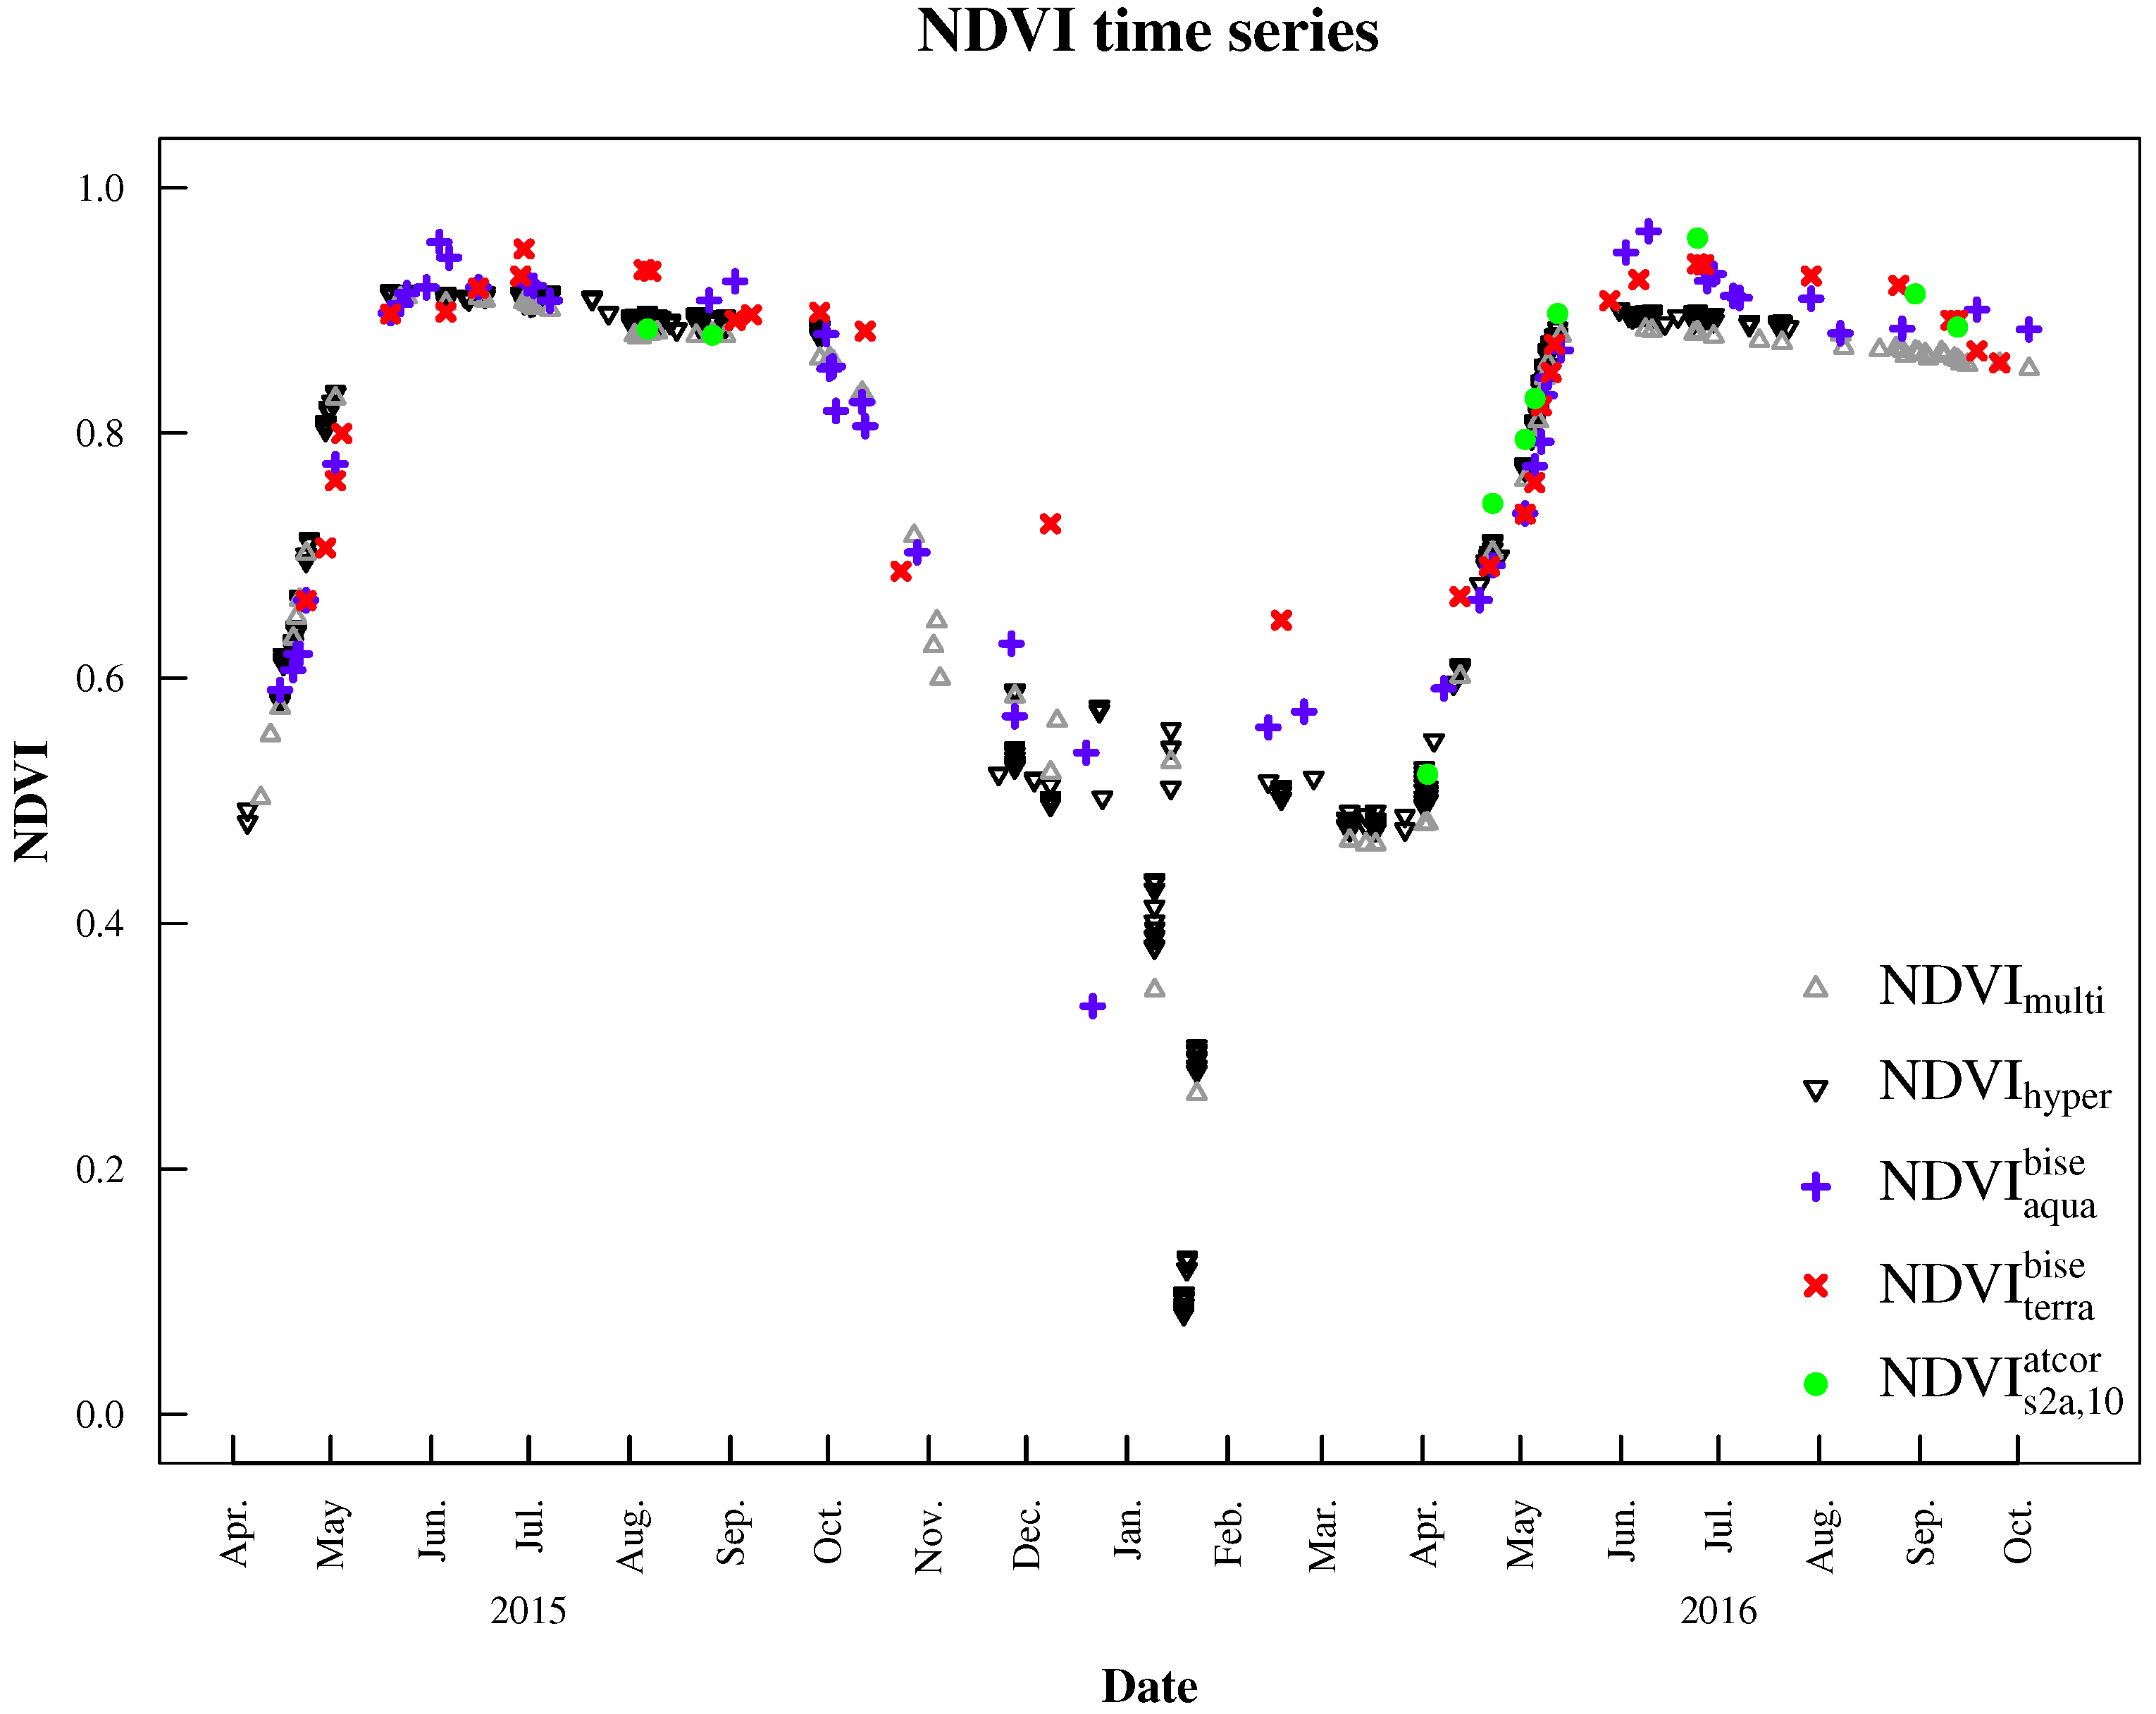 NDVI time series derived from the hyperspectral sensor system, multispectral sensor system, MODIS Aqua and Terra, as well as Sentinel-2A processed with ATCOR 2/3.